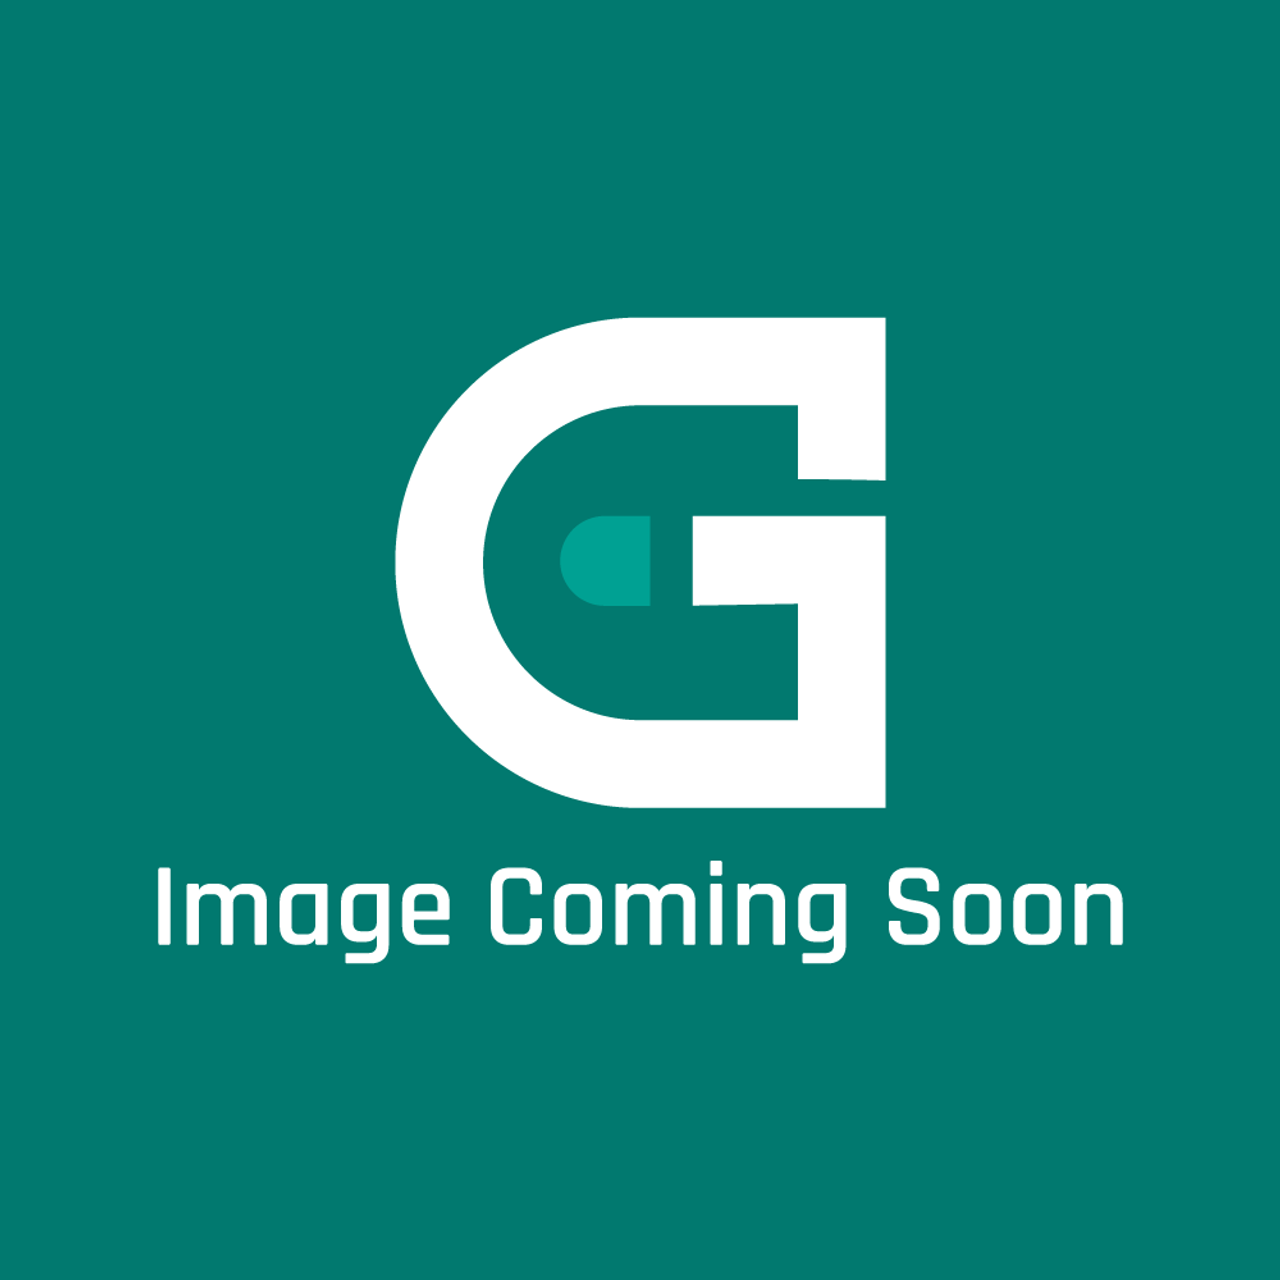 Frigidaire - Electrolux 316566901 Sleeve - Image Coming Soon!